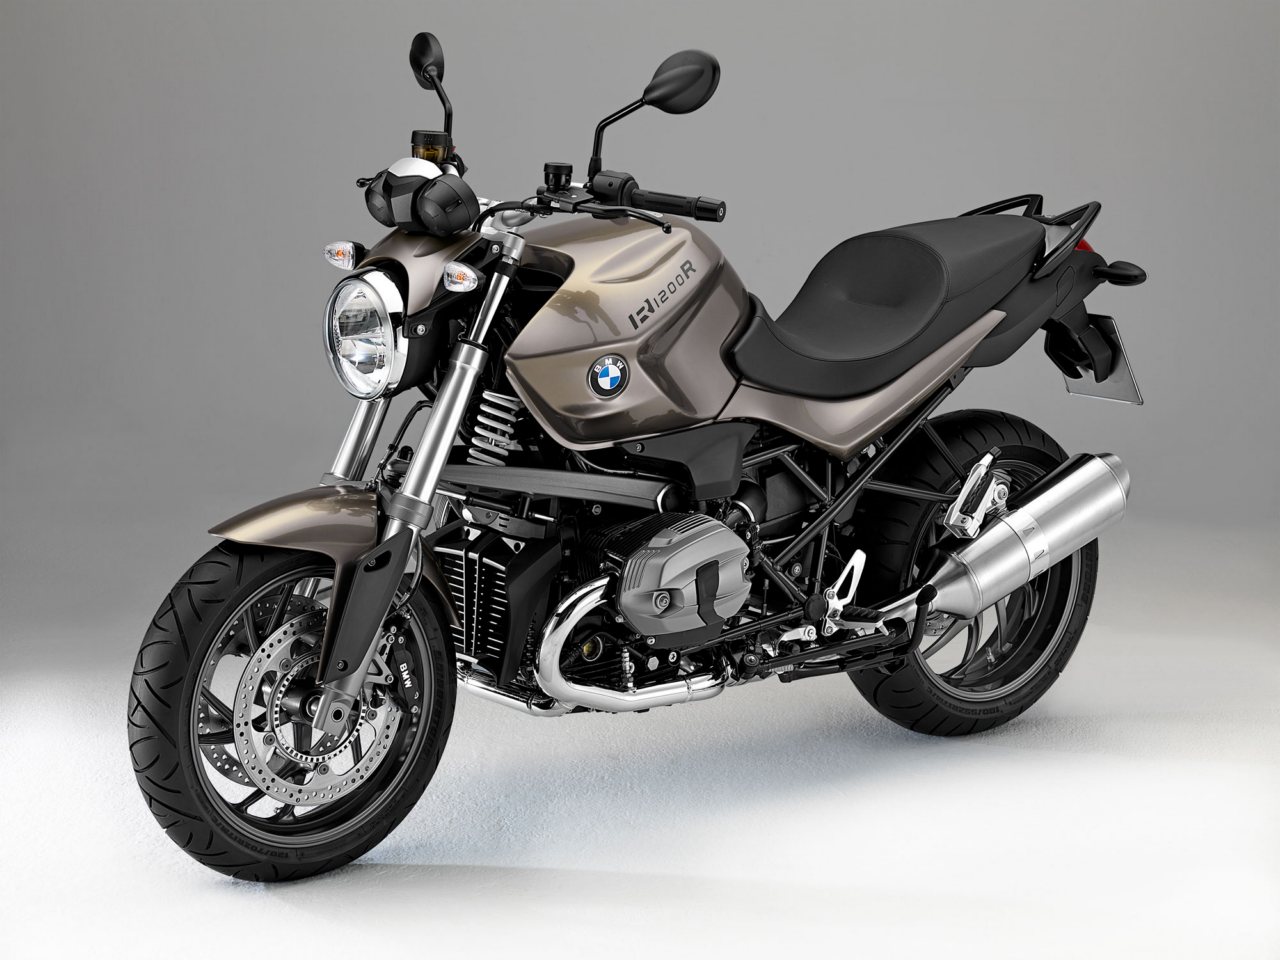 Bmw r1200r owner reports #6